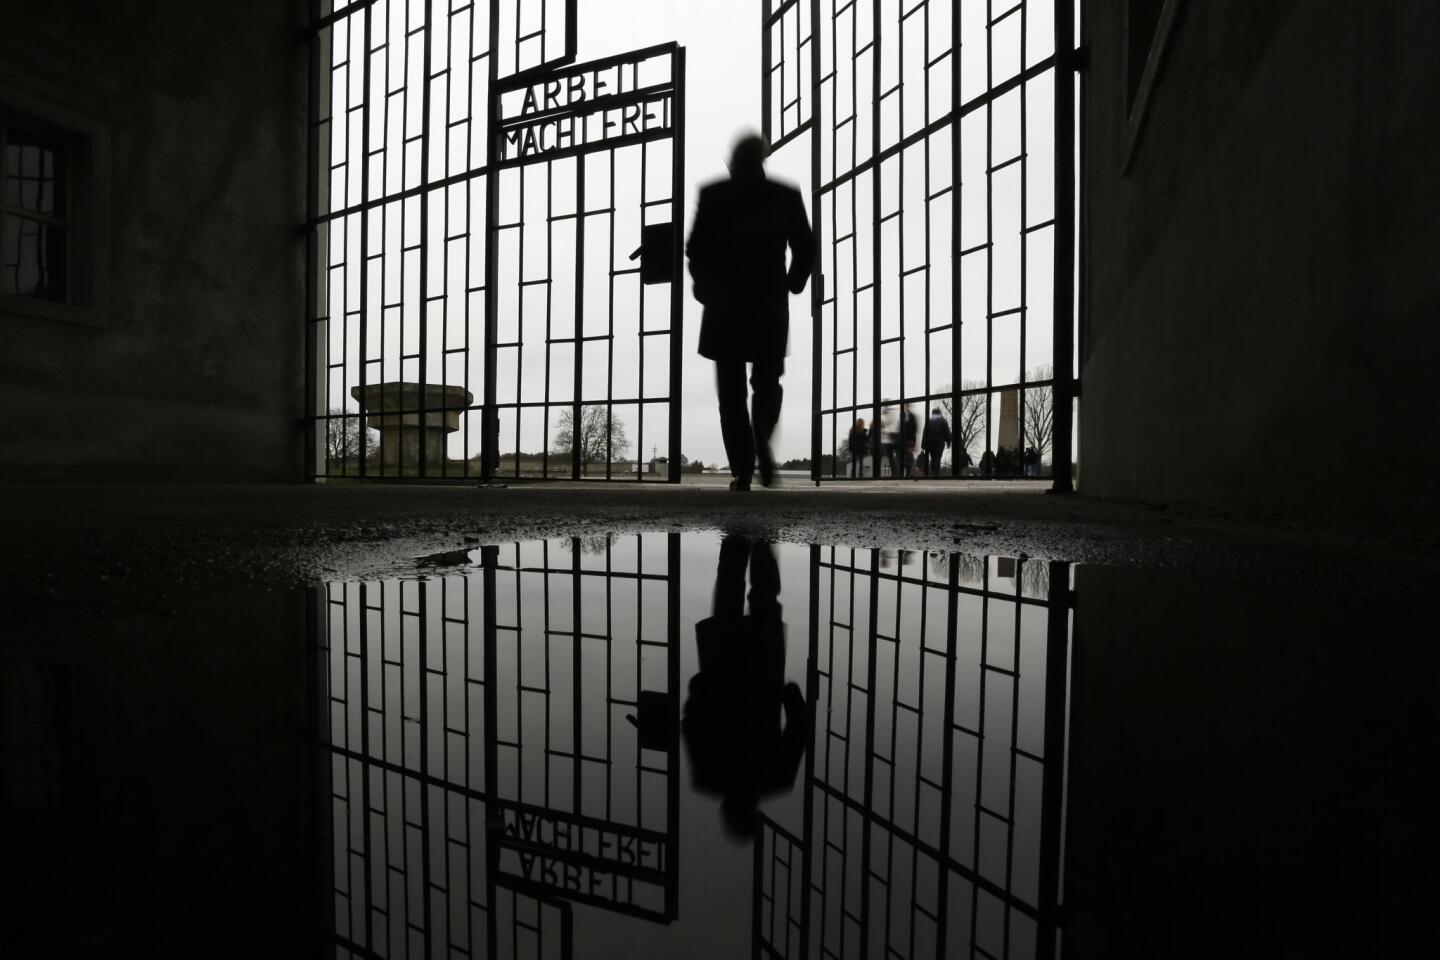 A man enters the Sachsenhausen Nazi death camp through the gate with the phrase "Arbeit macht frei" ("work sets you free") in Oranienburg, Germany. International Holocaust Remembrance Day marks the liberation of the Auschwitz Nazi death camp on Jan. 27, 1945.